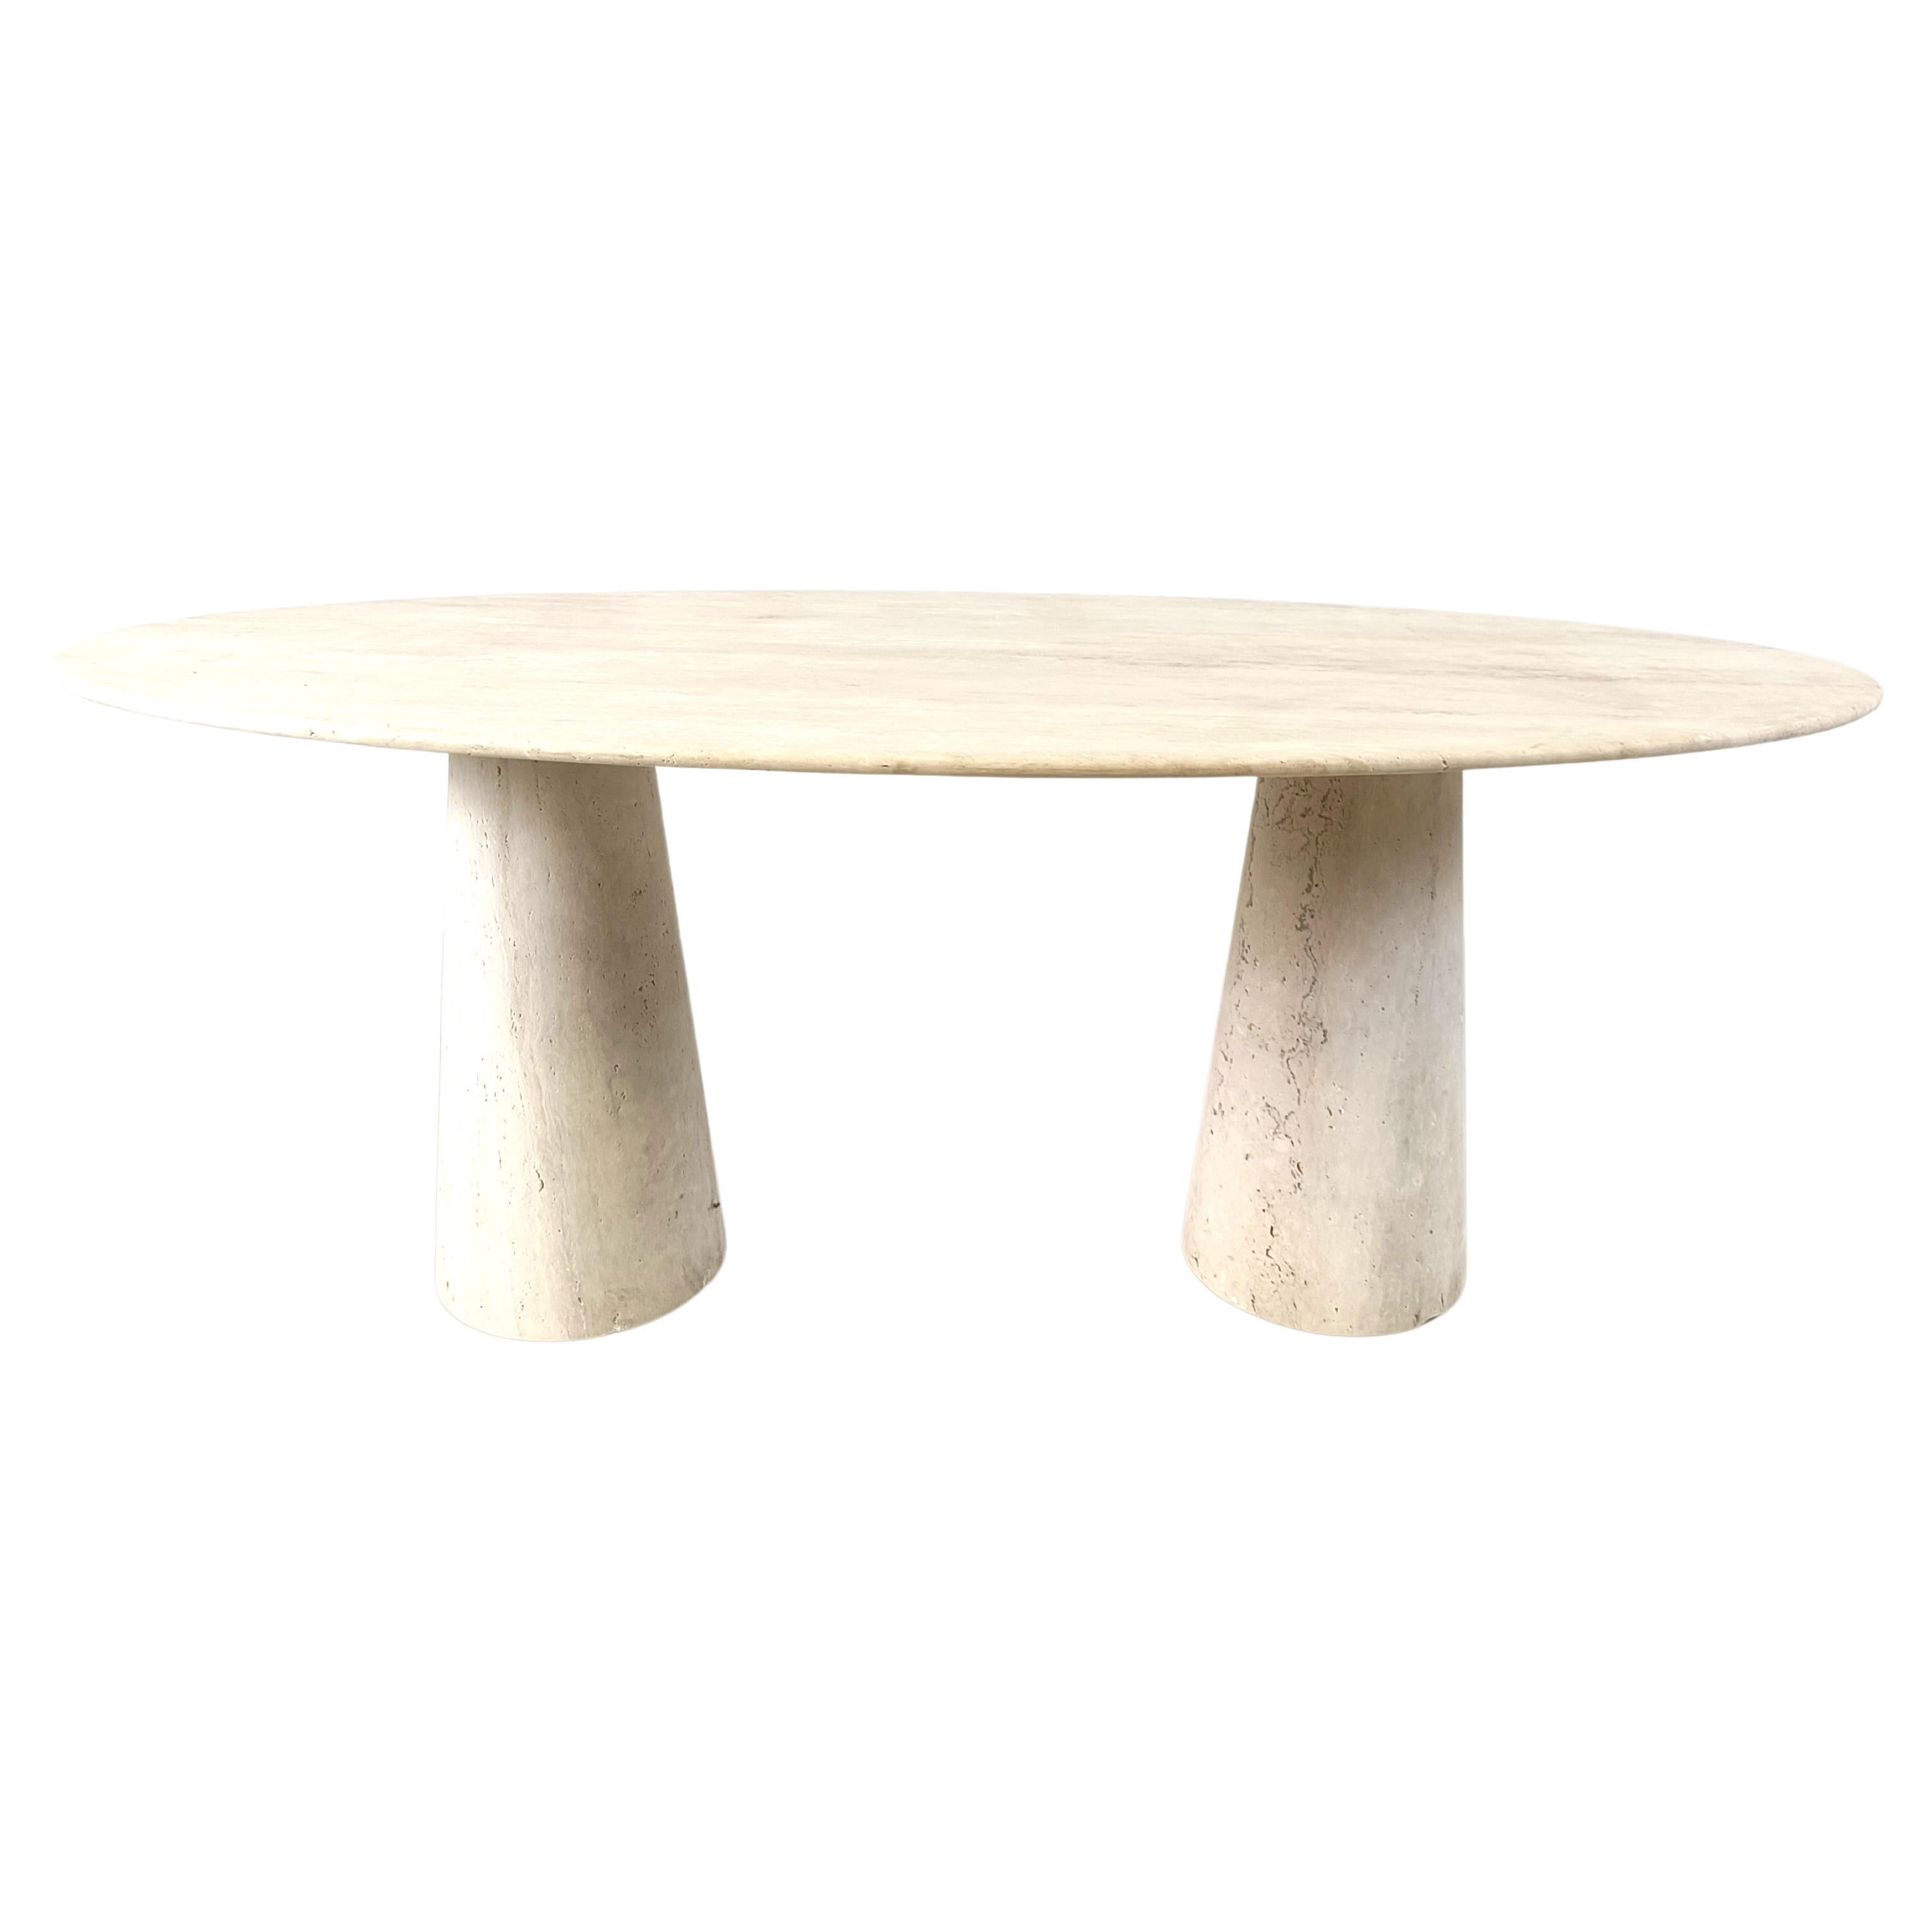 Vintage oval travertine dining table, 1970s